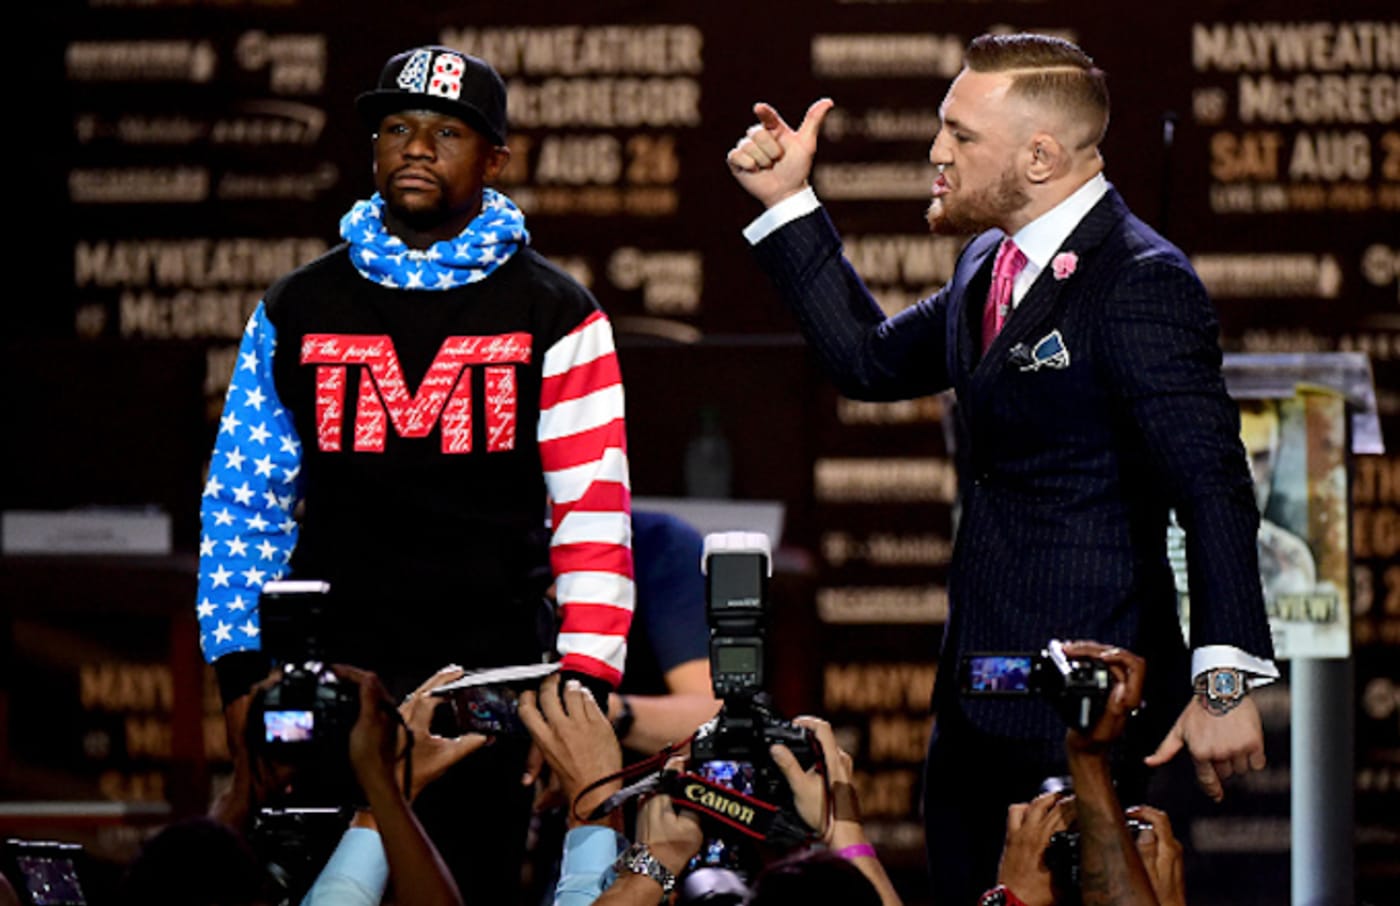 Floyd Mayweather Jr. and Conor McGregor faceoff on stage